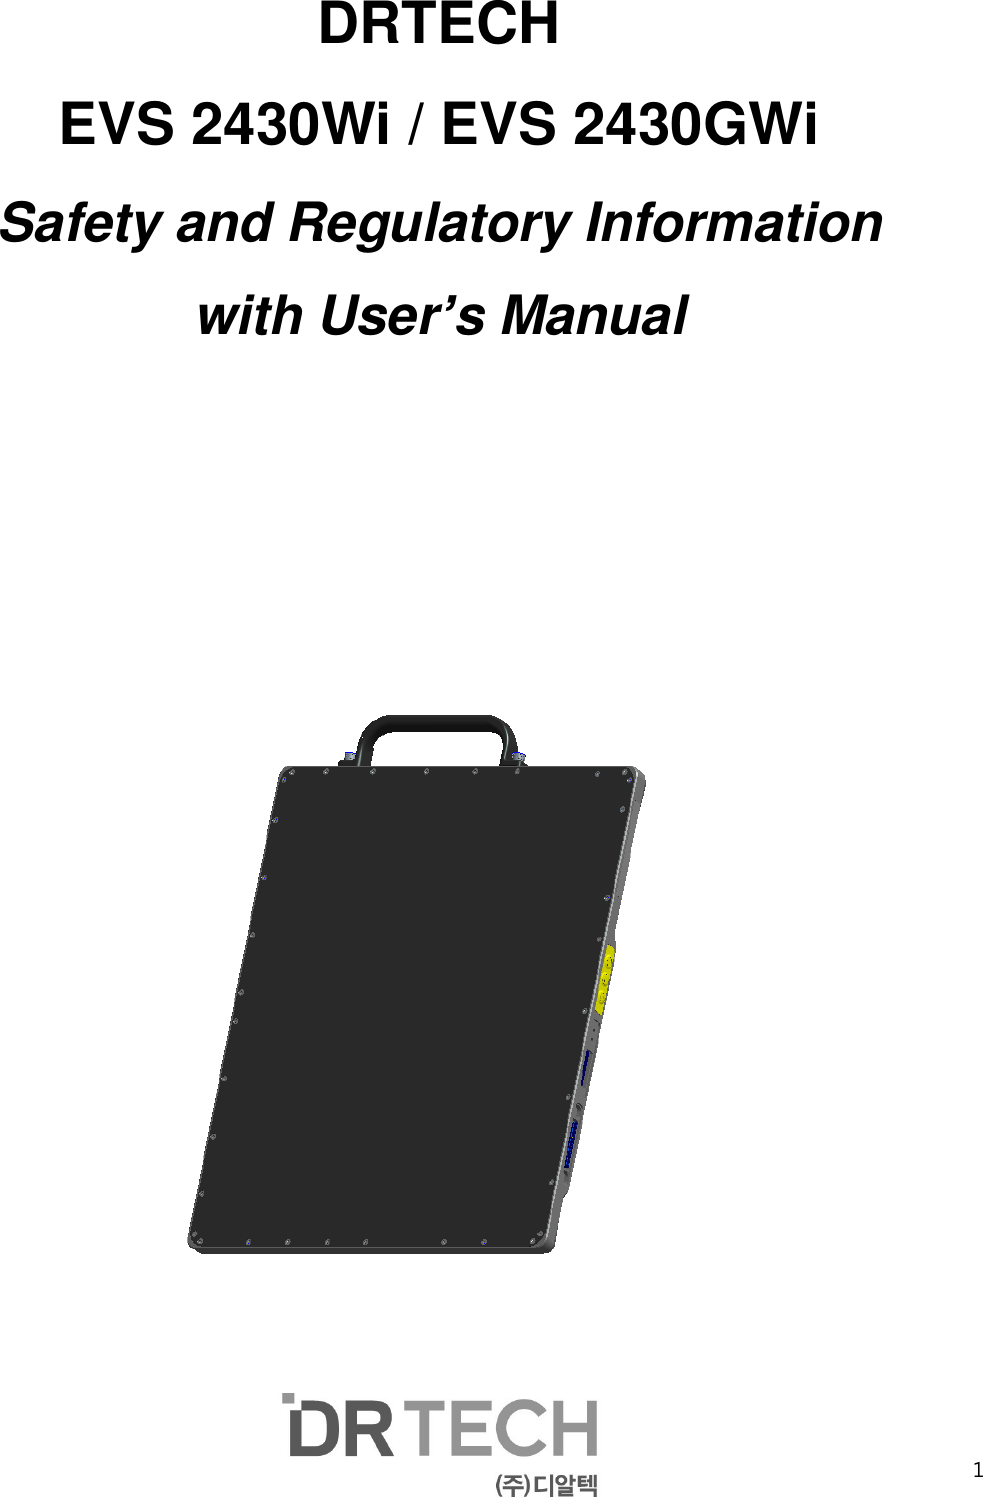 1 DRTECH   EVS 2430Wi / EVS 2430GWi Safety and Regulatory Information with User’s Manual 